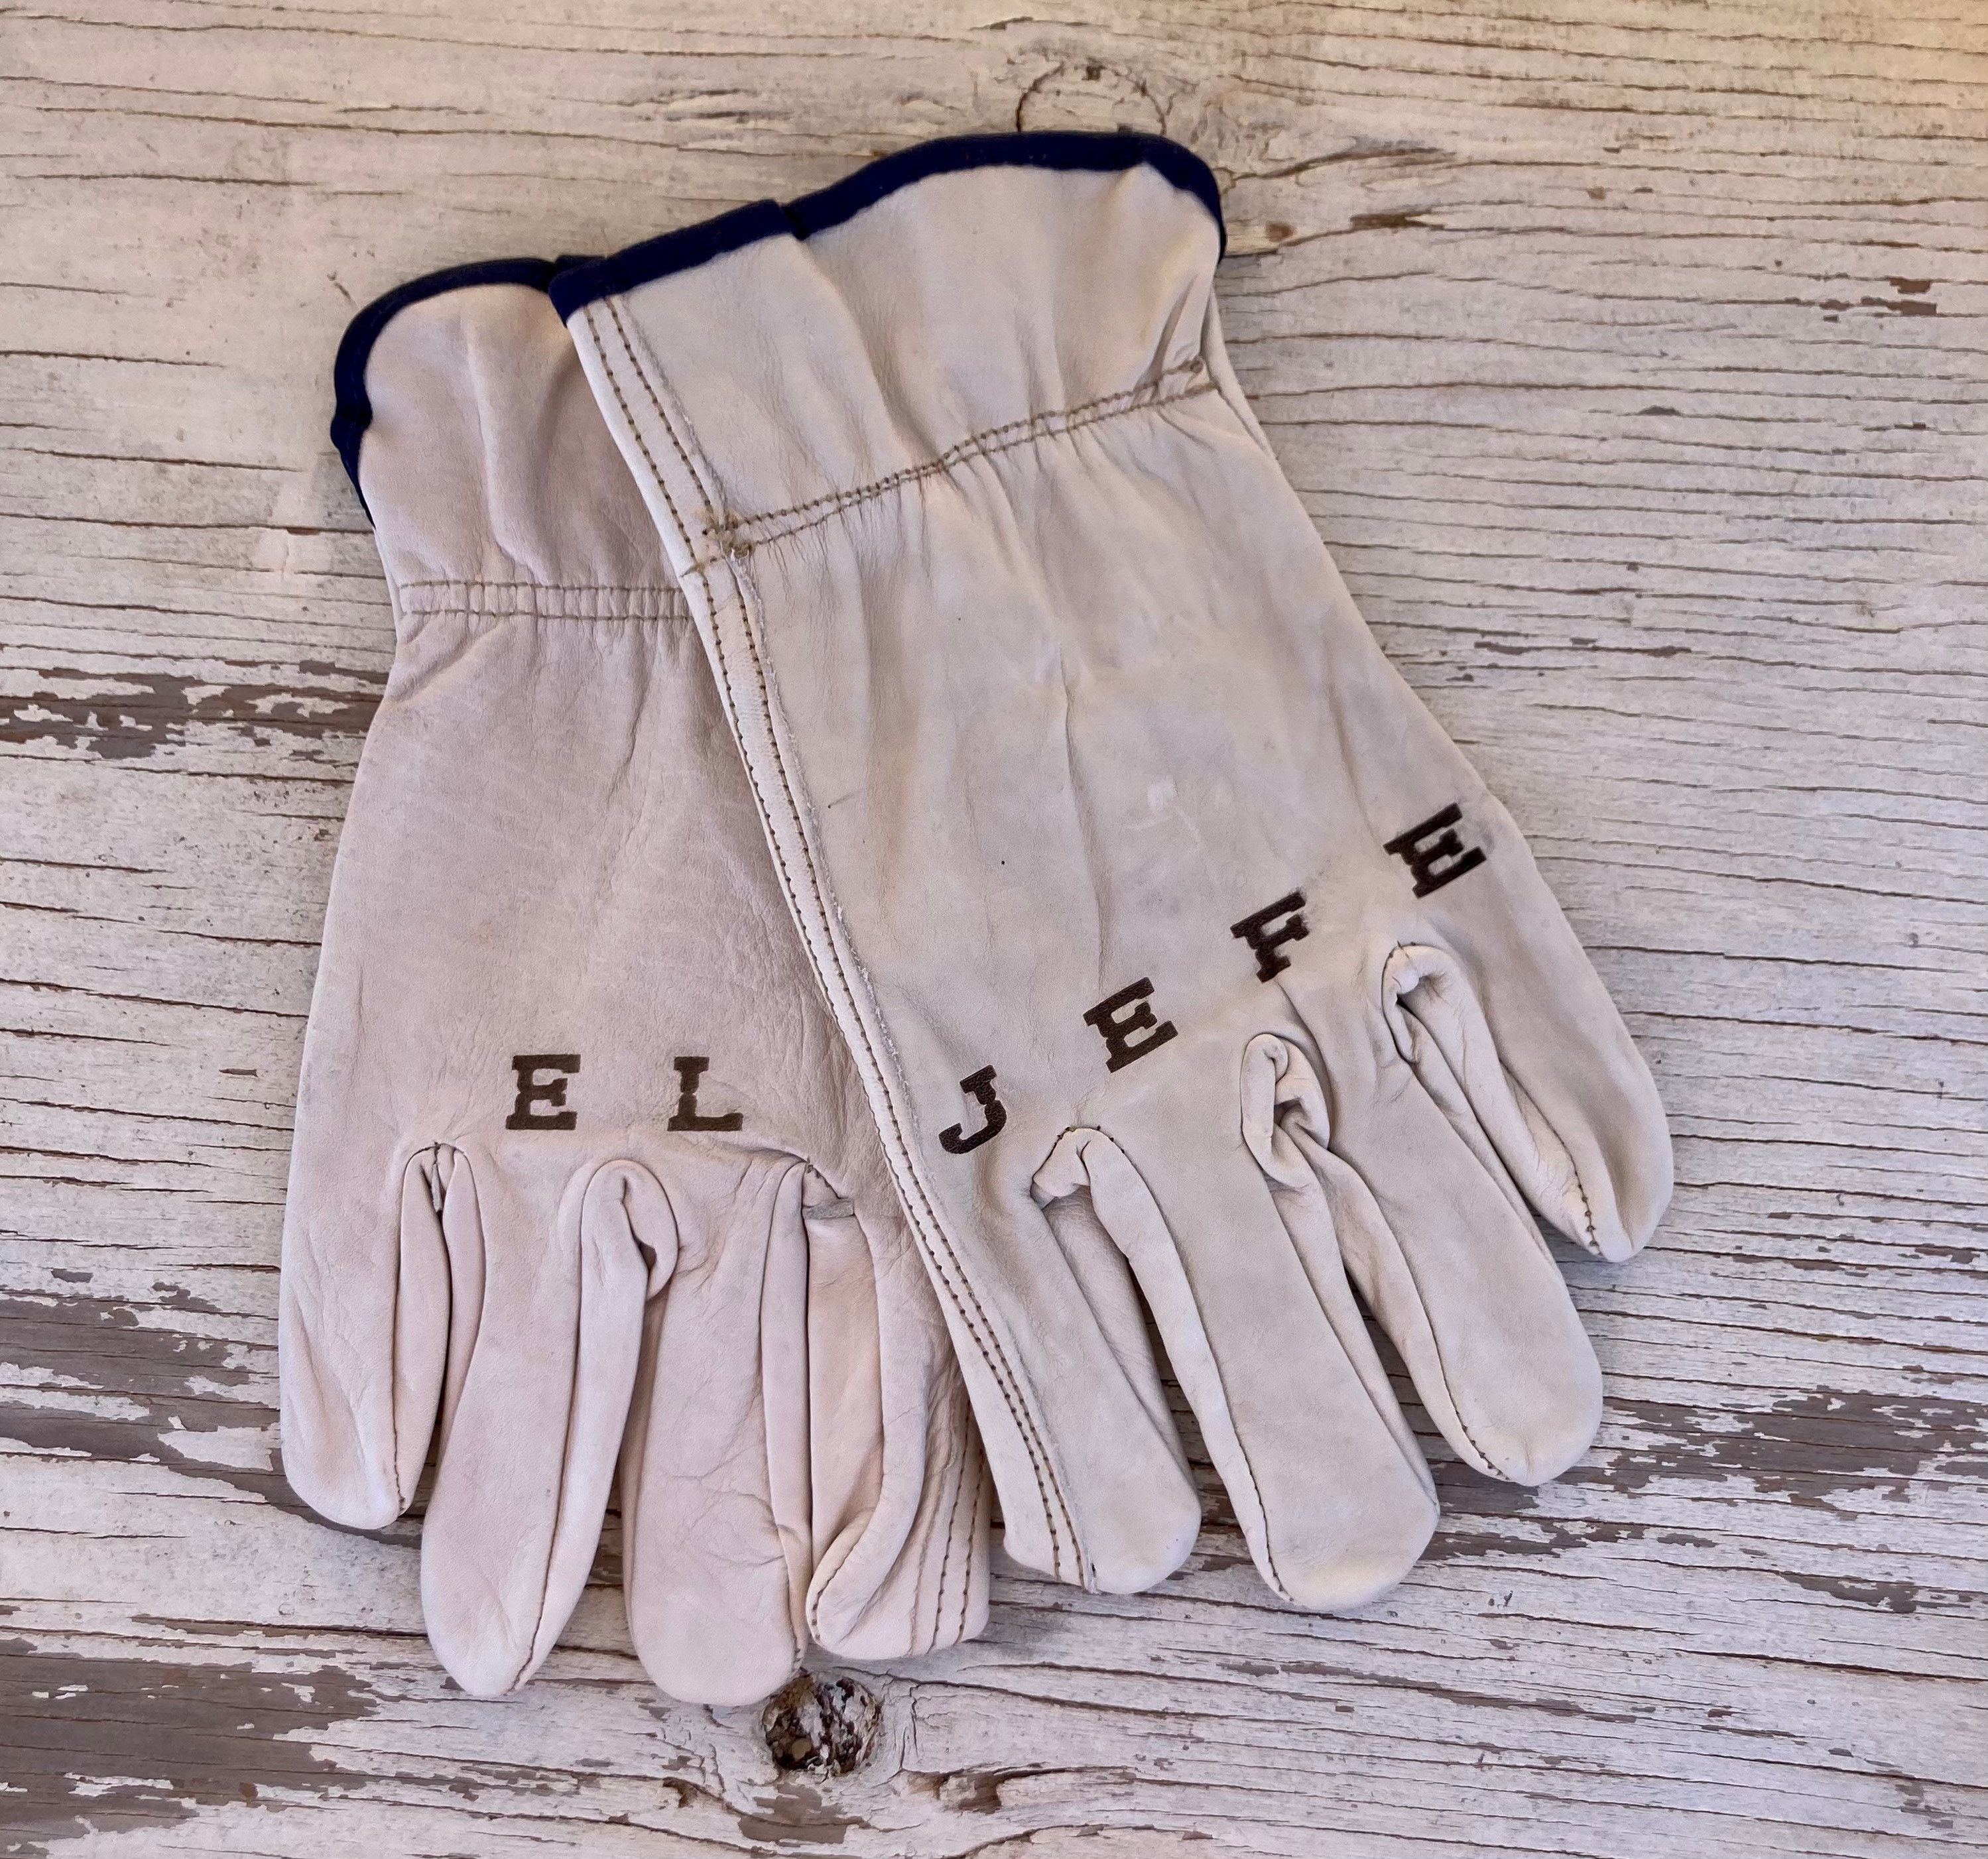 Personalized Leather Gloves, Grain Pigskin Leather brand FIRM GRIP Work  Gloves, Gift Daddy, Construction Gloves, Work Outdoor Men's 